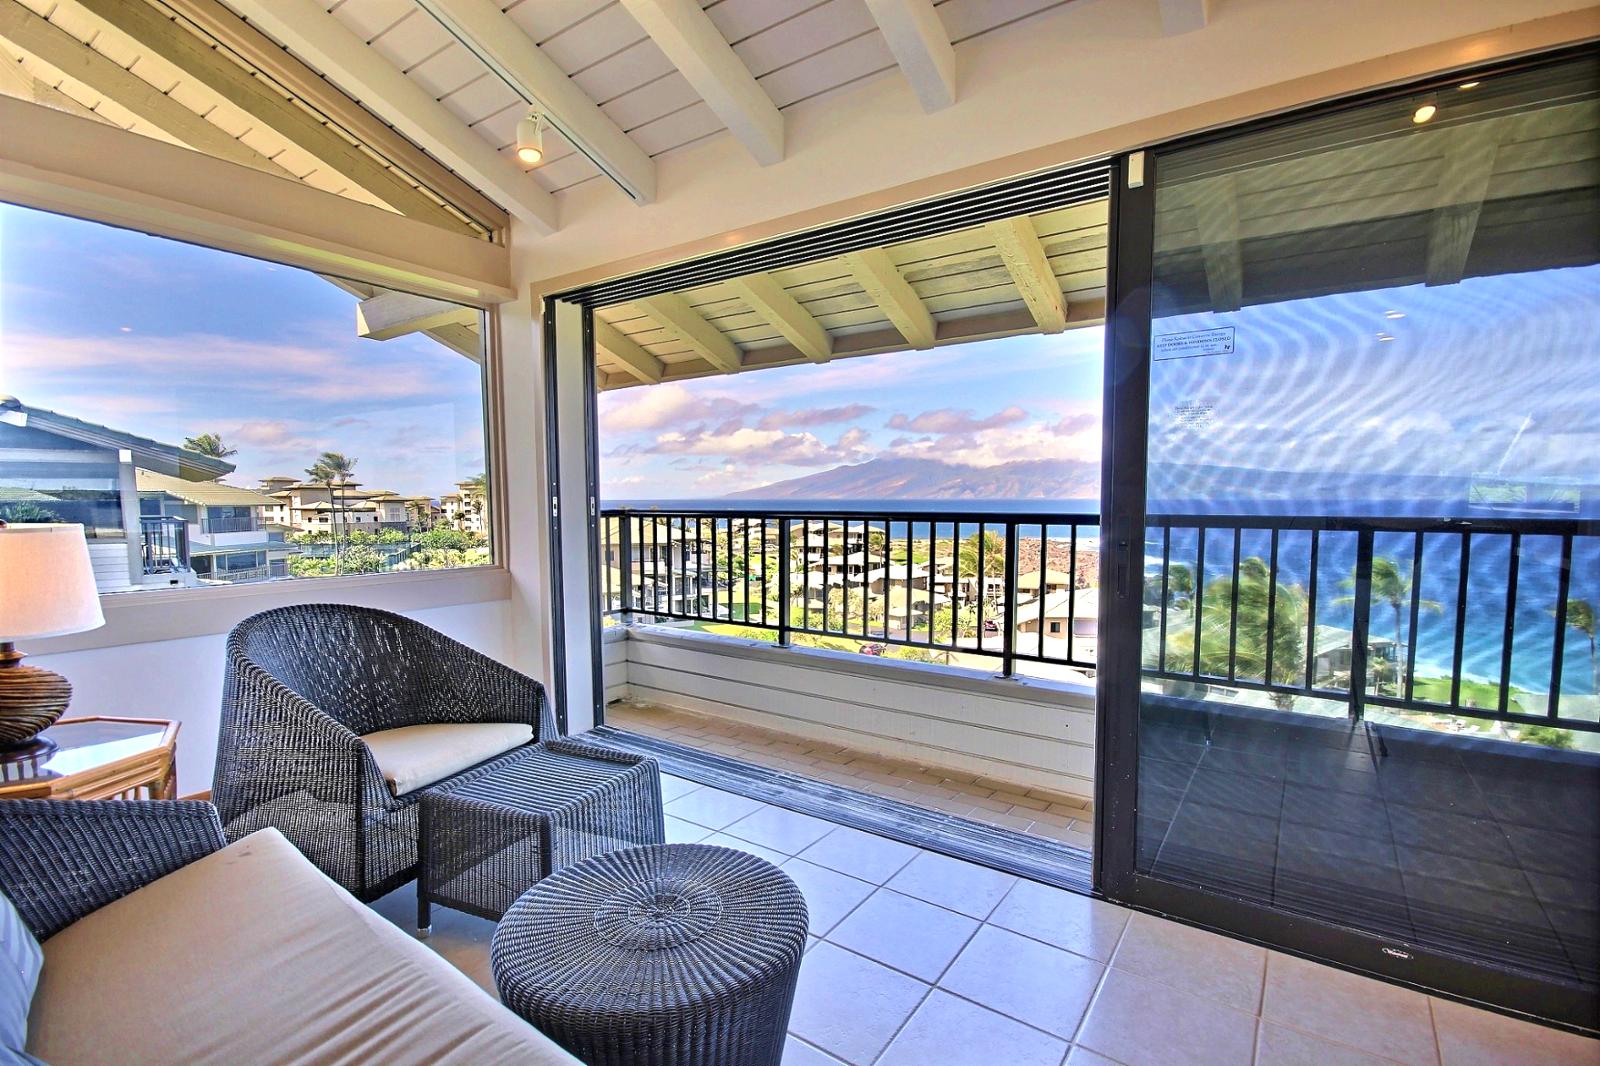 Looking out from the master bedroom at the amazing ocean views. 